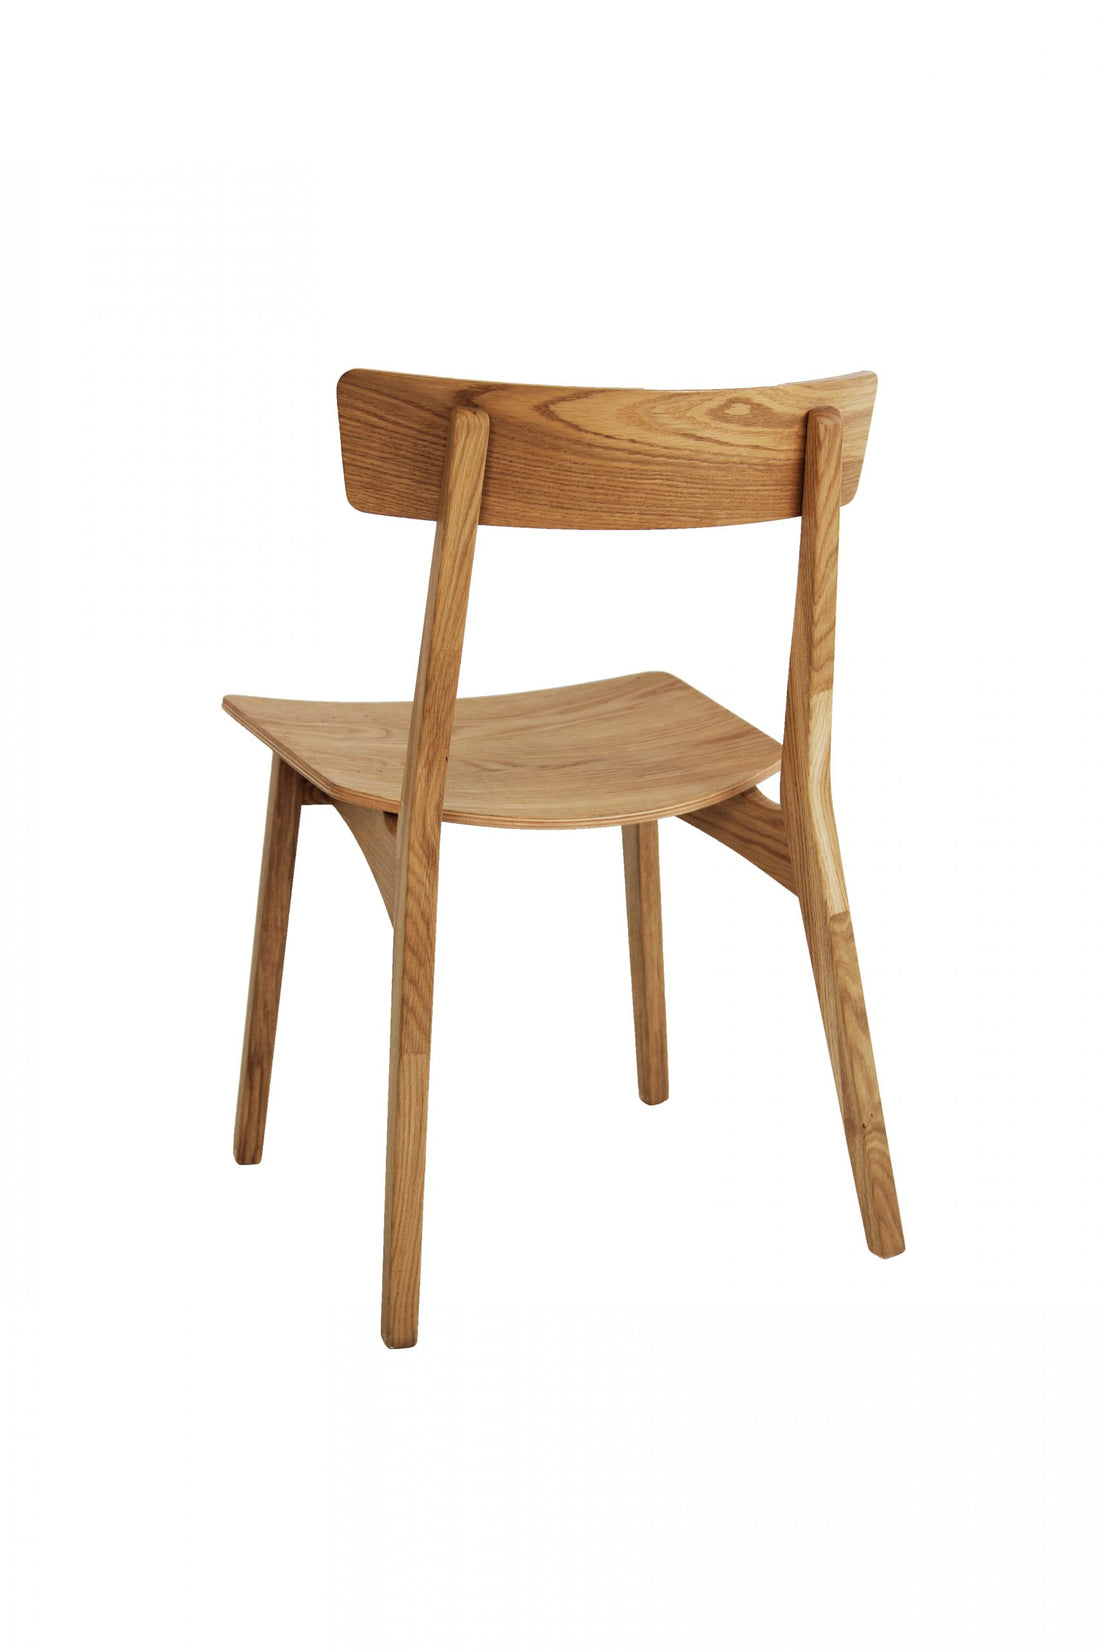 Aurora Dining Chair in Walnut or Oak by S10Home